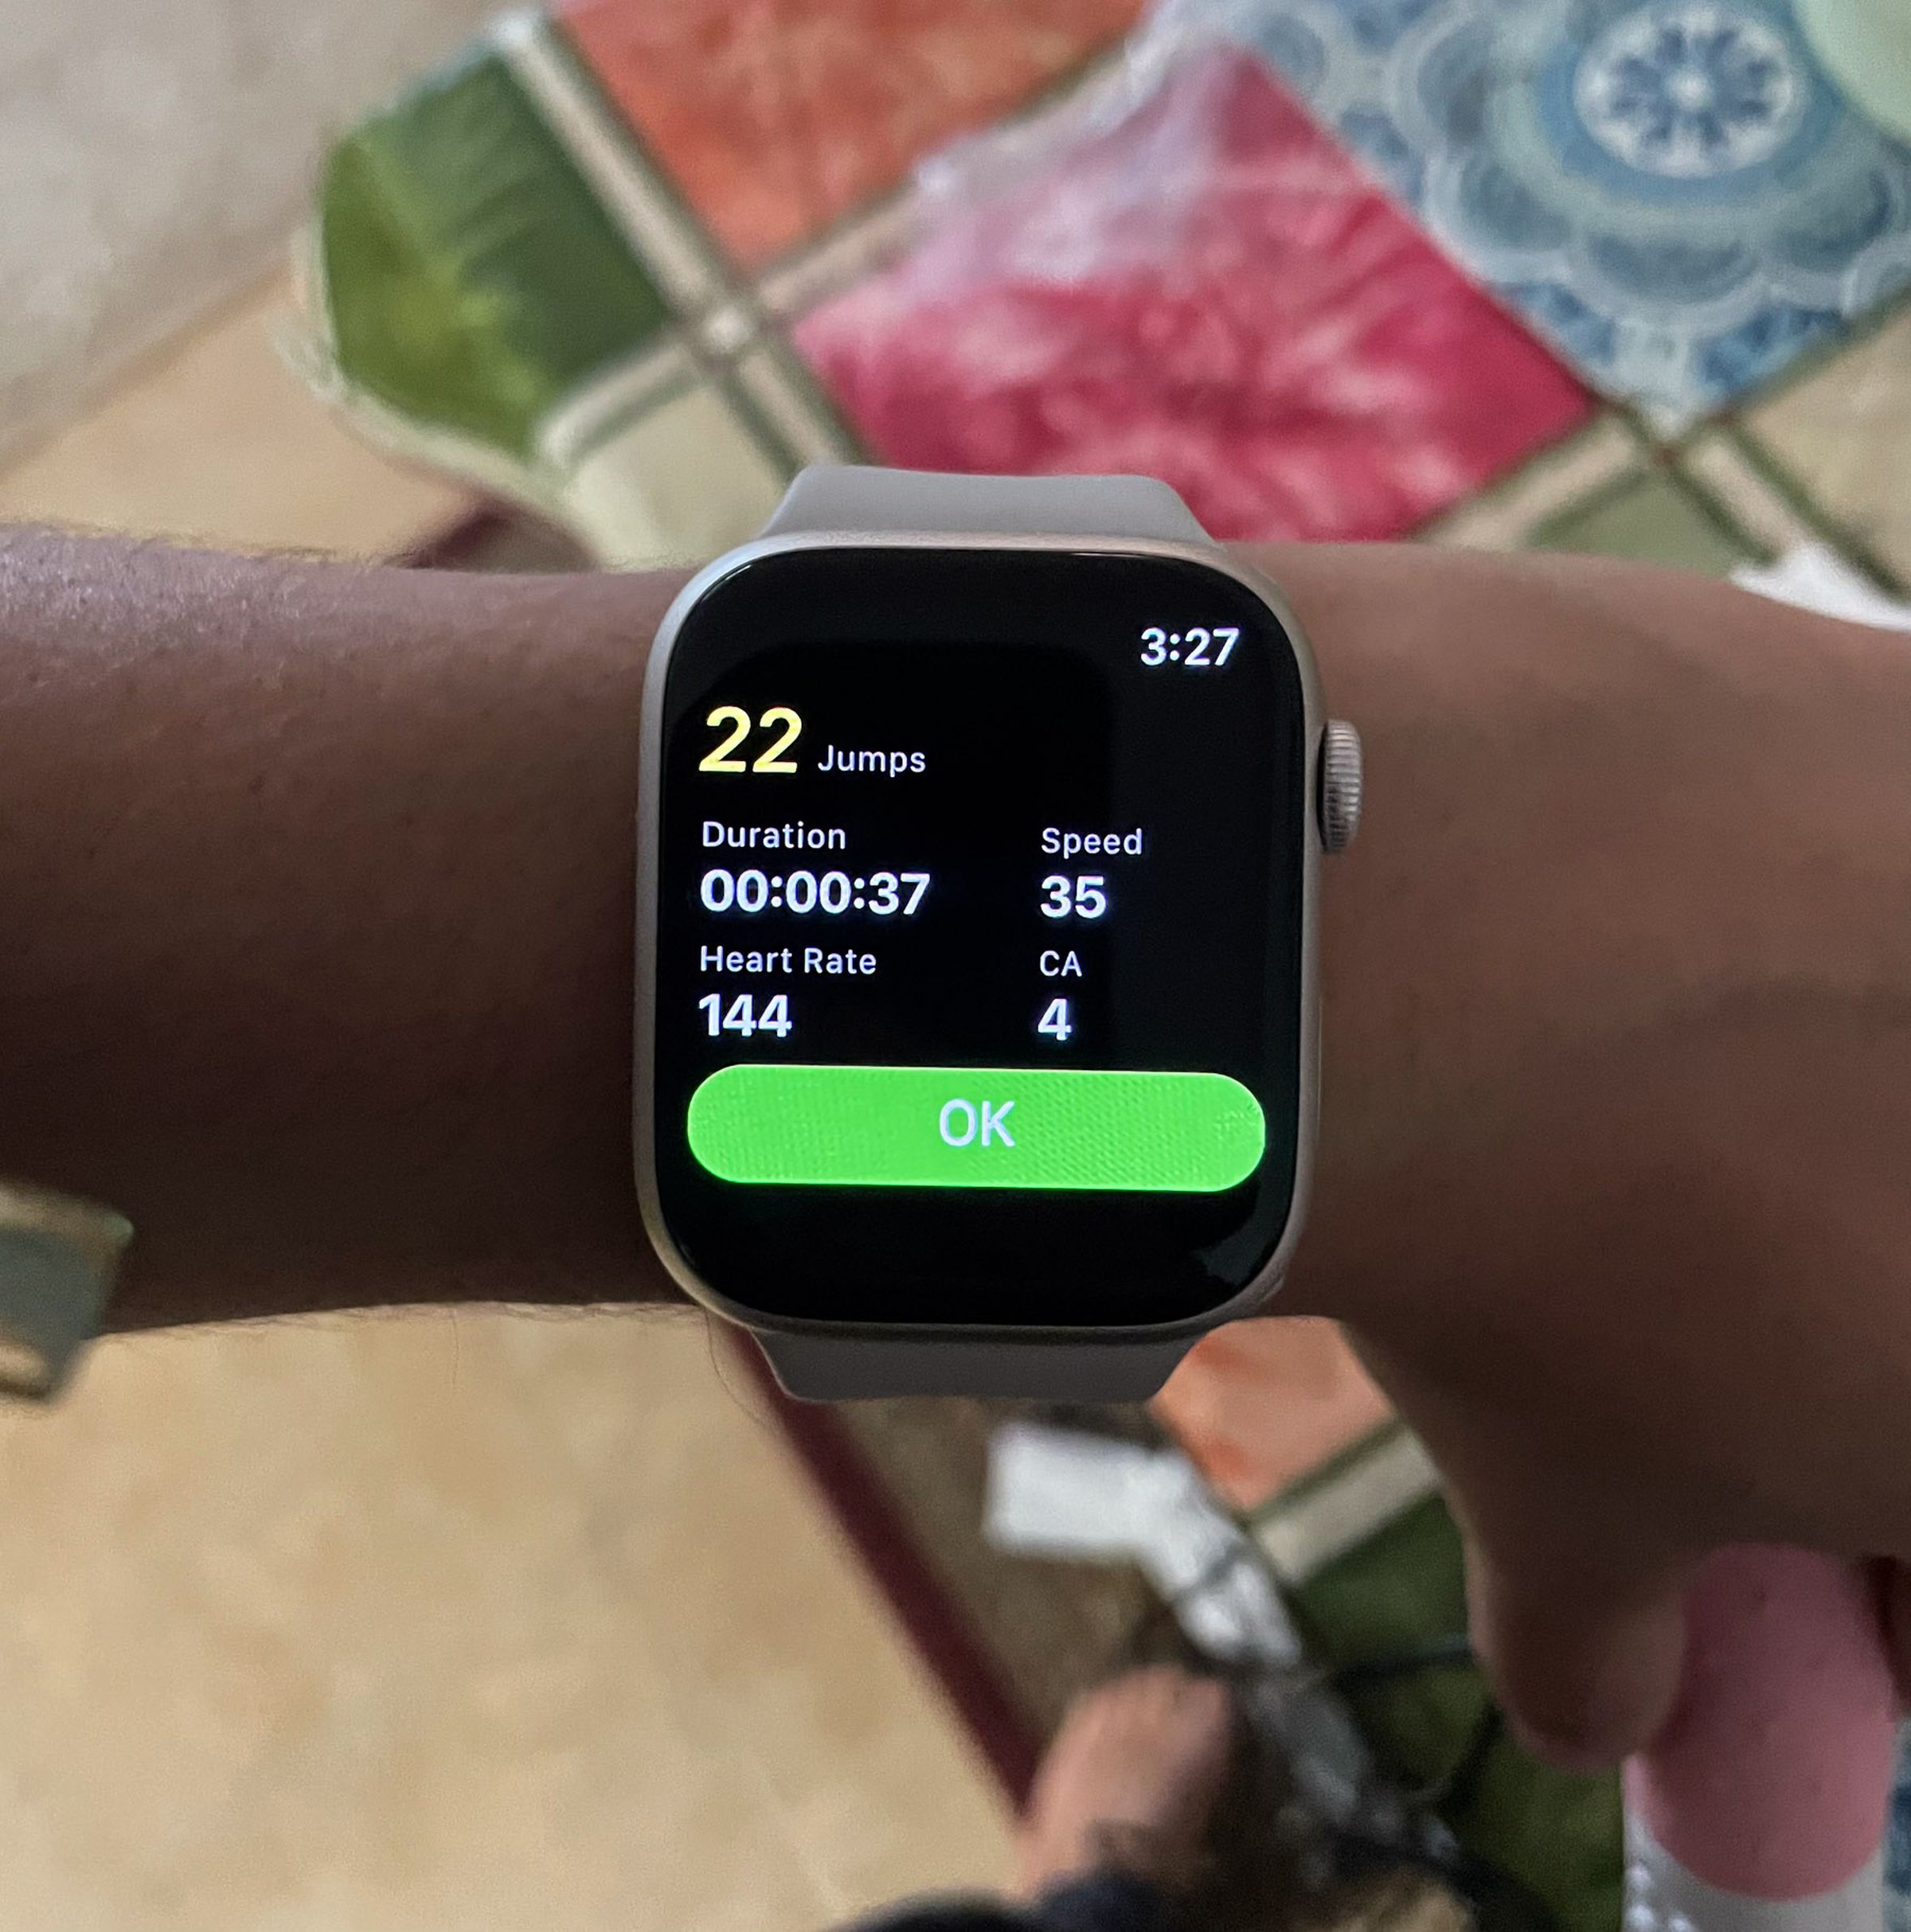 A wrist wearing the Apple Watch Series 8 with the YaoYao app open, display heart rate, timer, speed, and (incorrectly) the number of jumps.